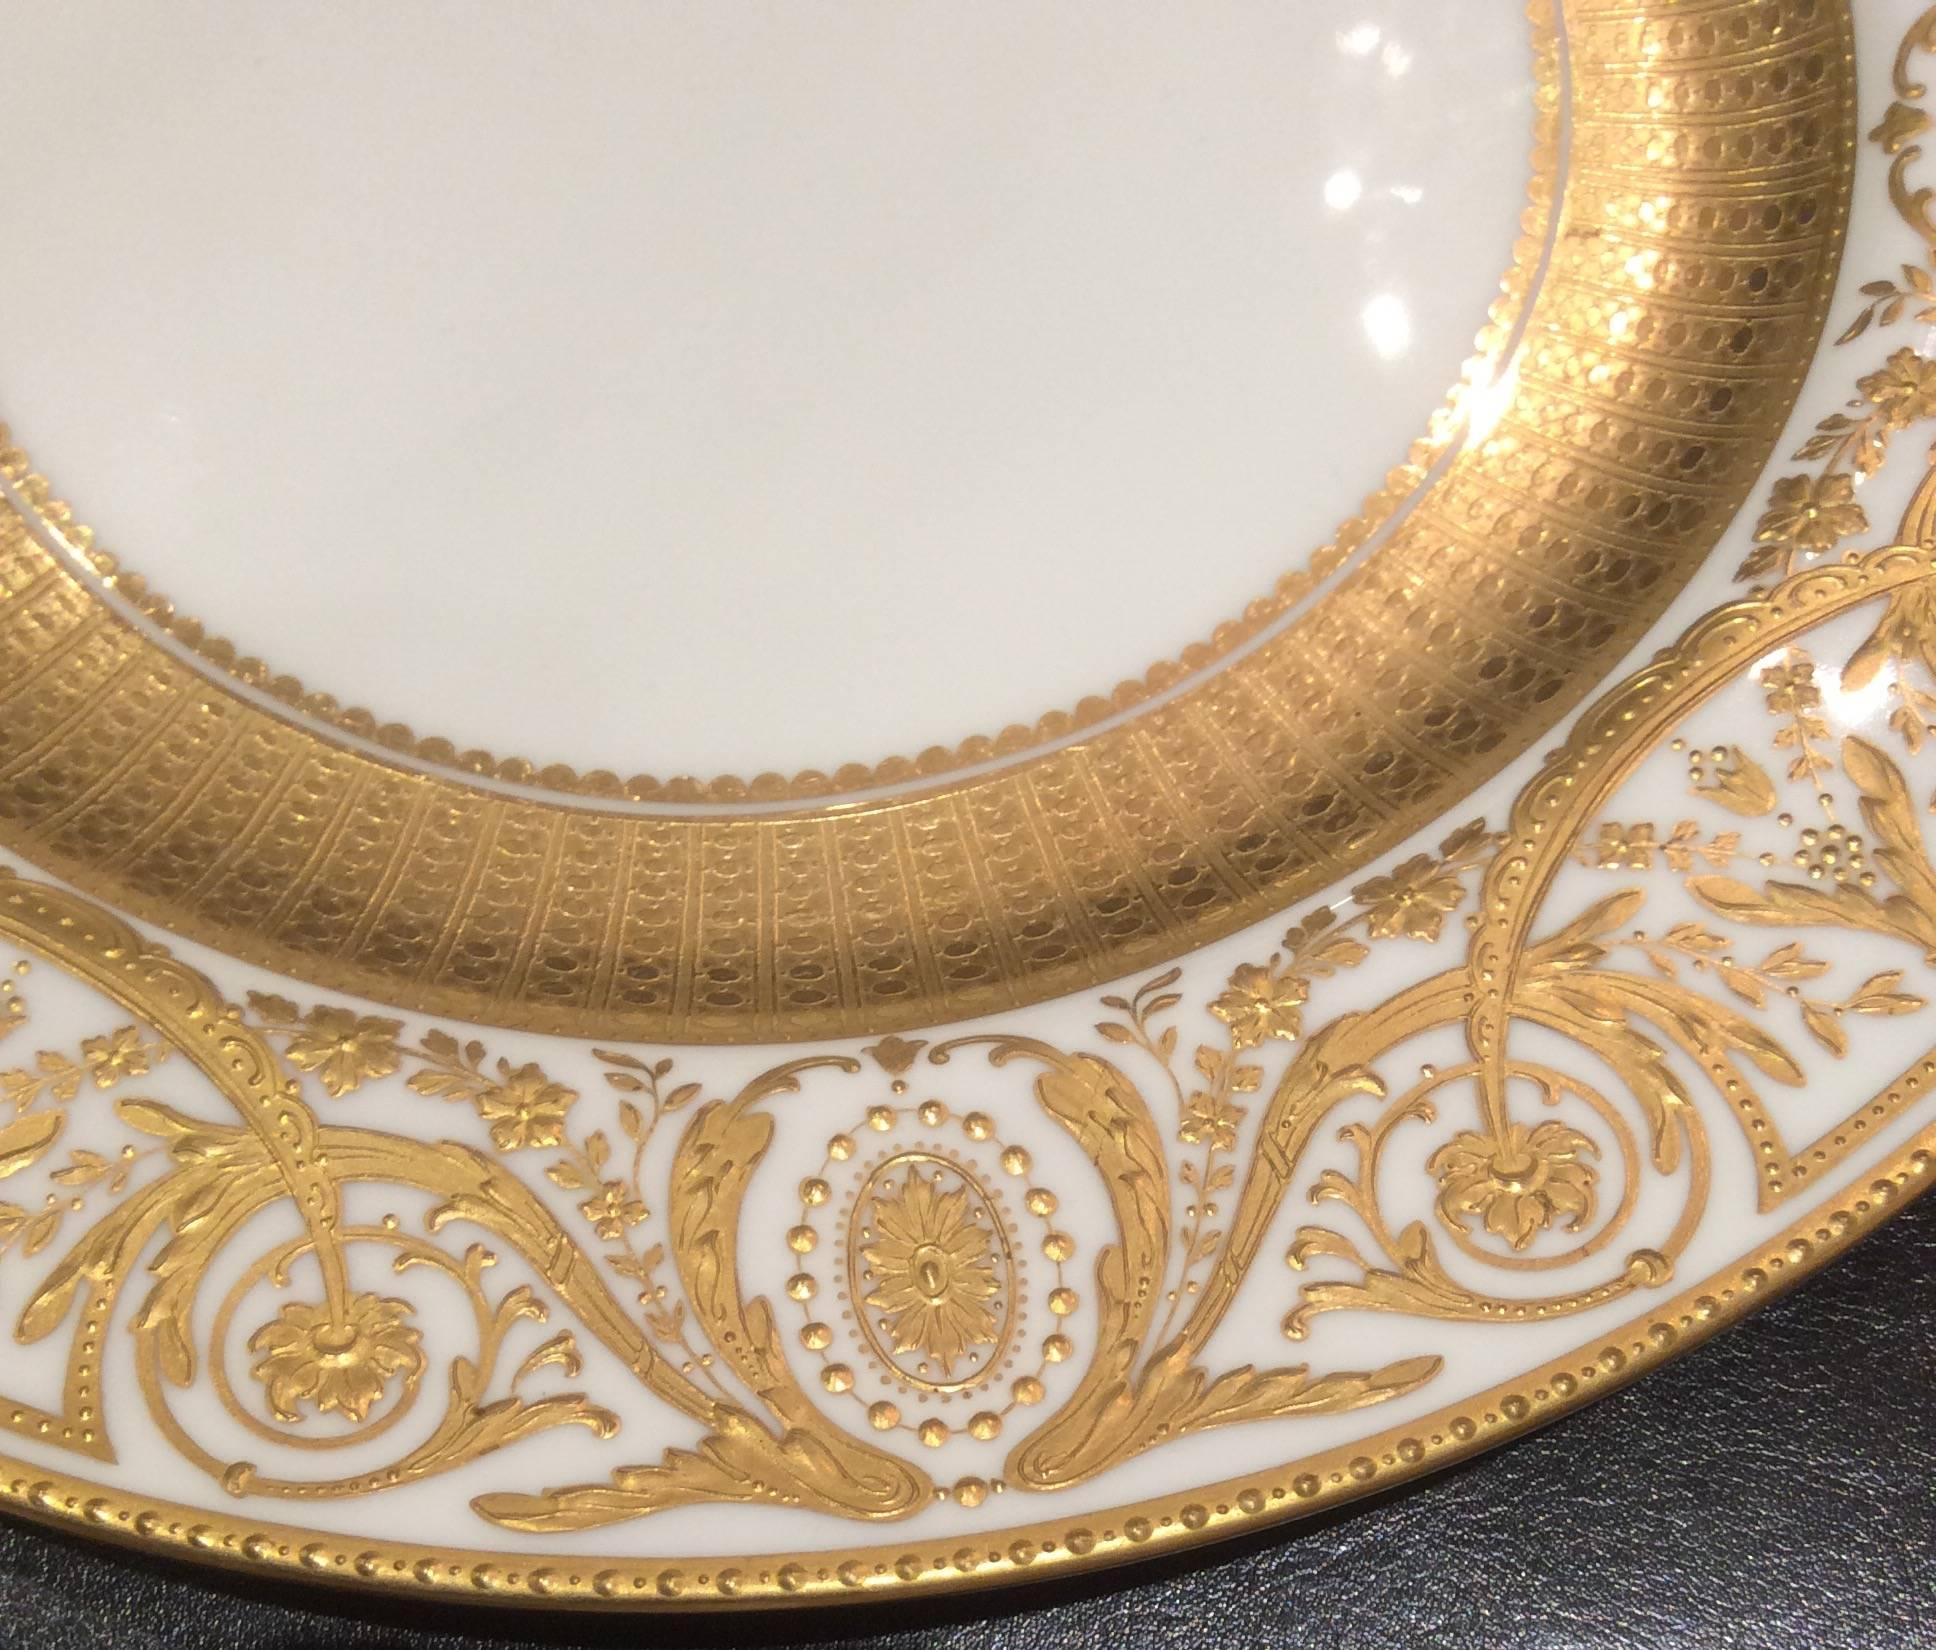 An elaborate and wonderful set of 11 dinner or presentation plates from Minton, England custom for the fine retailer: Tiffany. Raised tooled gilt floral swags, floral medallions and a stunning 24-karat wide acid etched band.